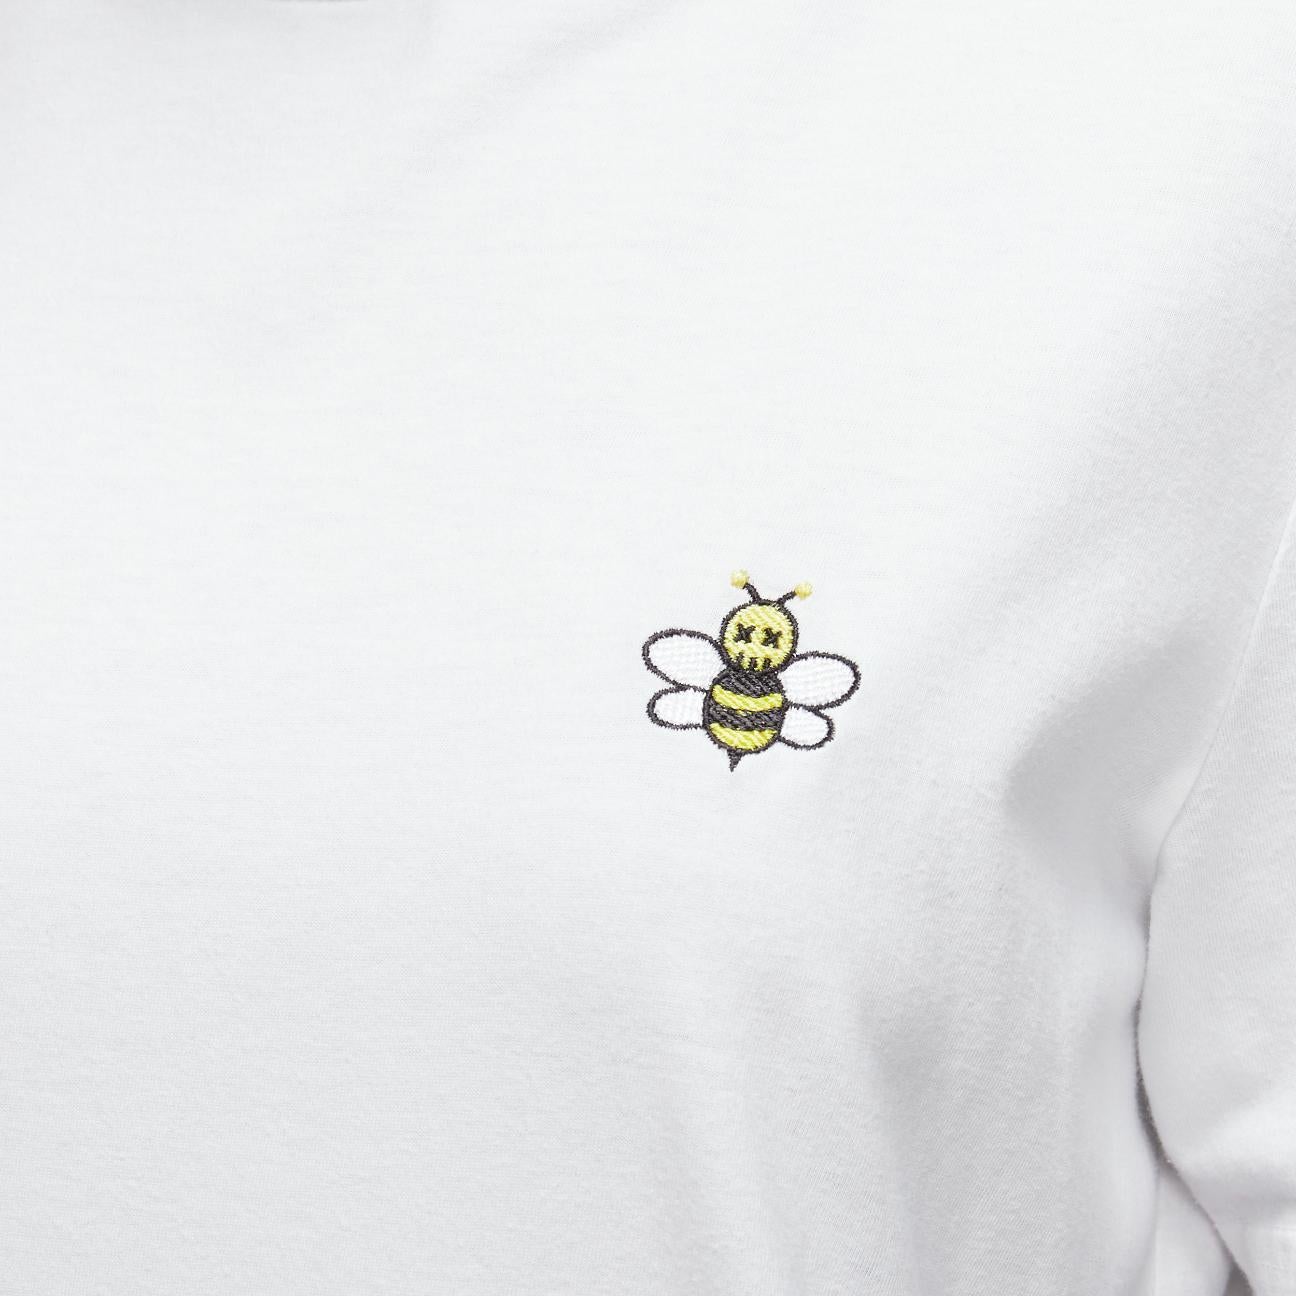 DIOR HOMME Kaws white yellow cross eye logo bee embroidery tshirt XS
Reference: YIKK/A00017
Brand: Dior
Collection: Kaws
Material: Cotton
Color: White, Yellow
Pattern: Solid
Closure: Pullover
Extra Details: Plain back.
Made in: